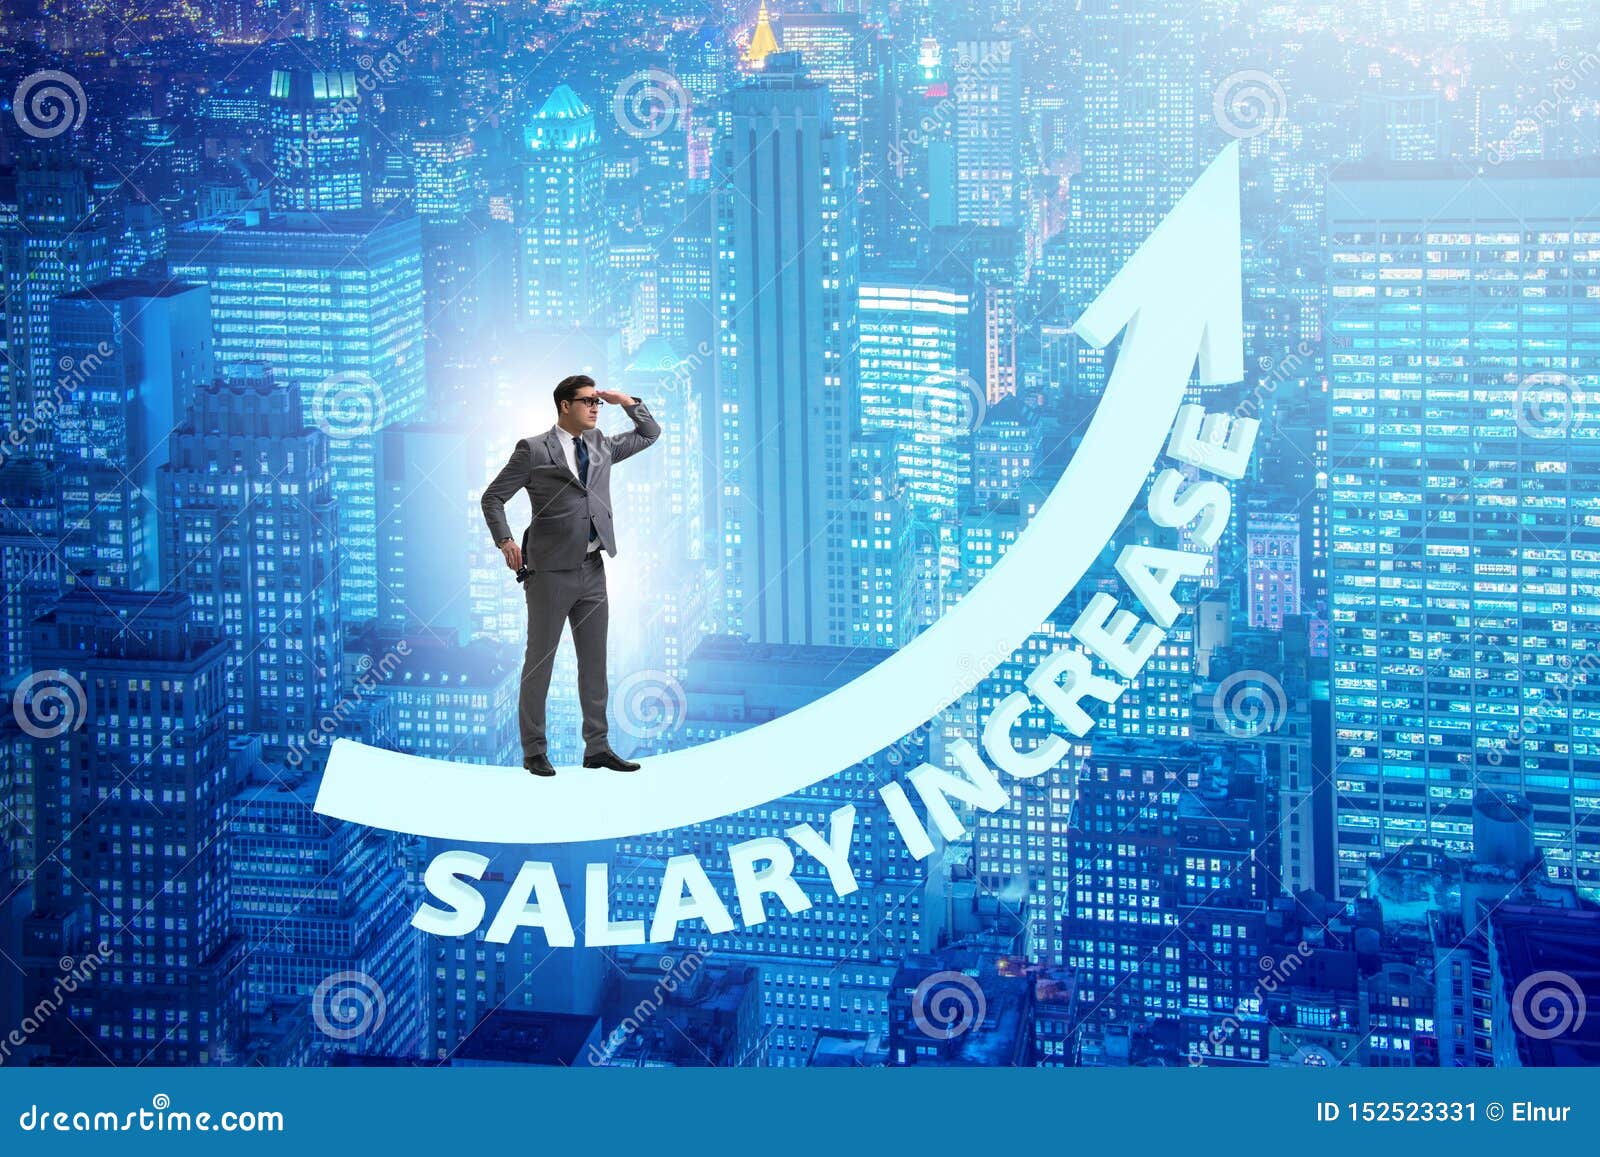 Employee in Salary Increase Concept Stock Image Image of forecast